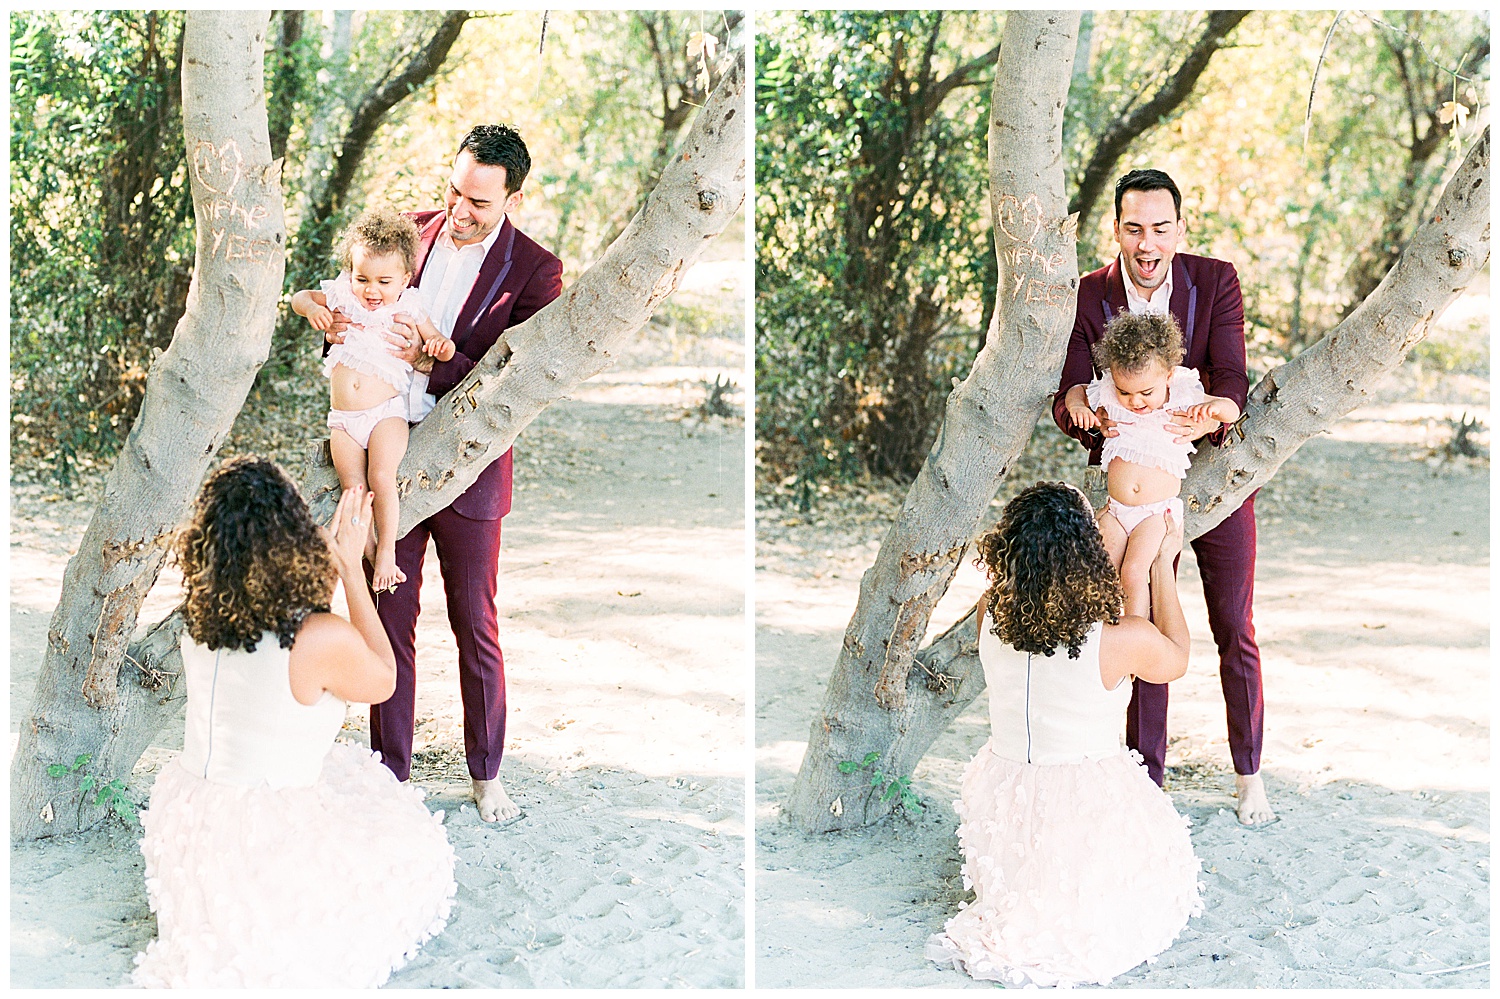 San Francisco wedding  and portrait photographer photographing family sessions in Sacramento California using film